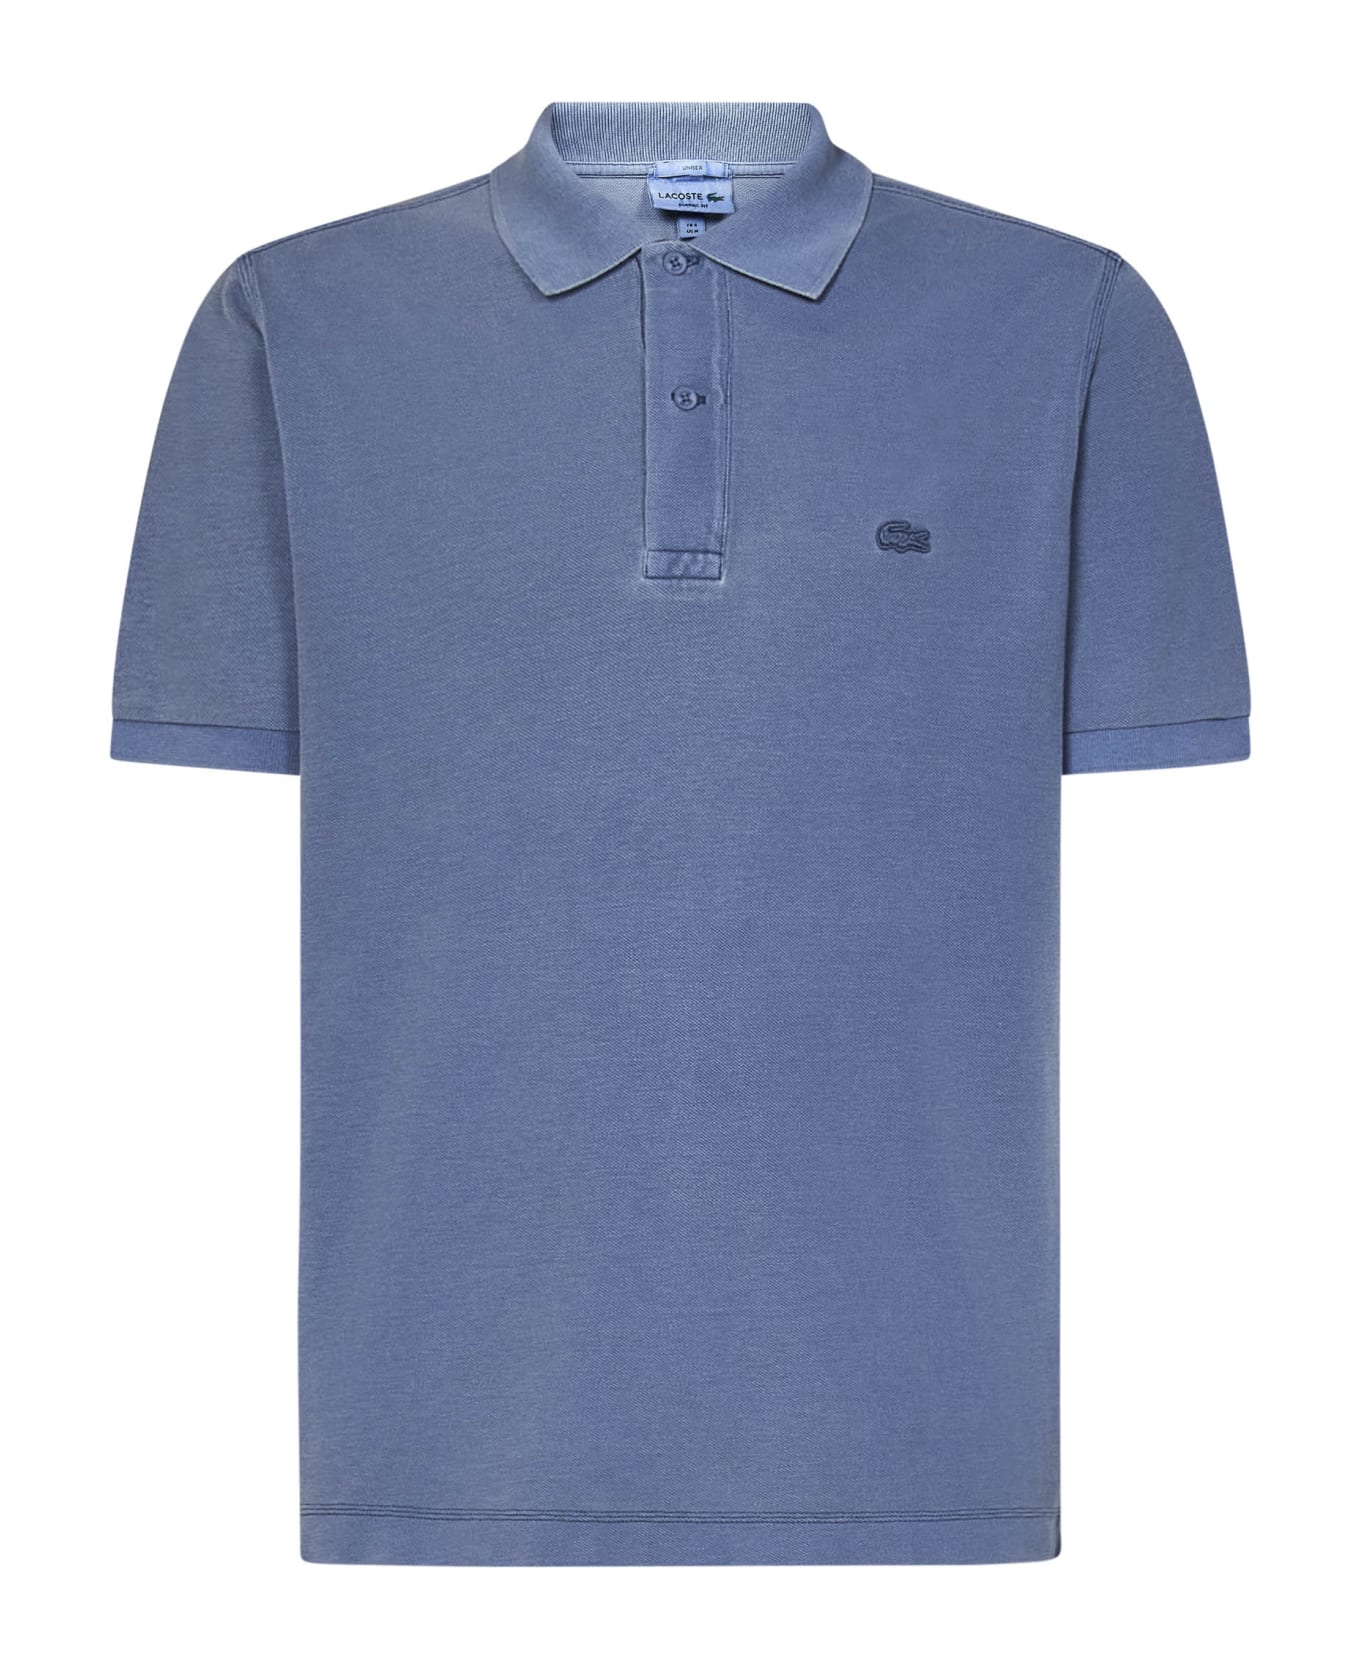 Lacoste Polo Shirt - Clear Blue